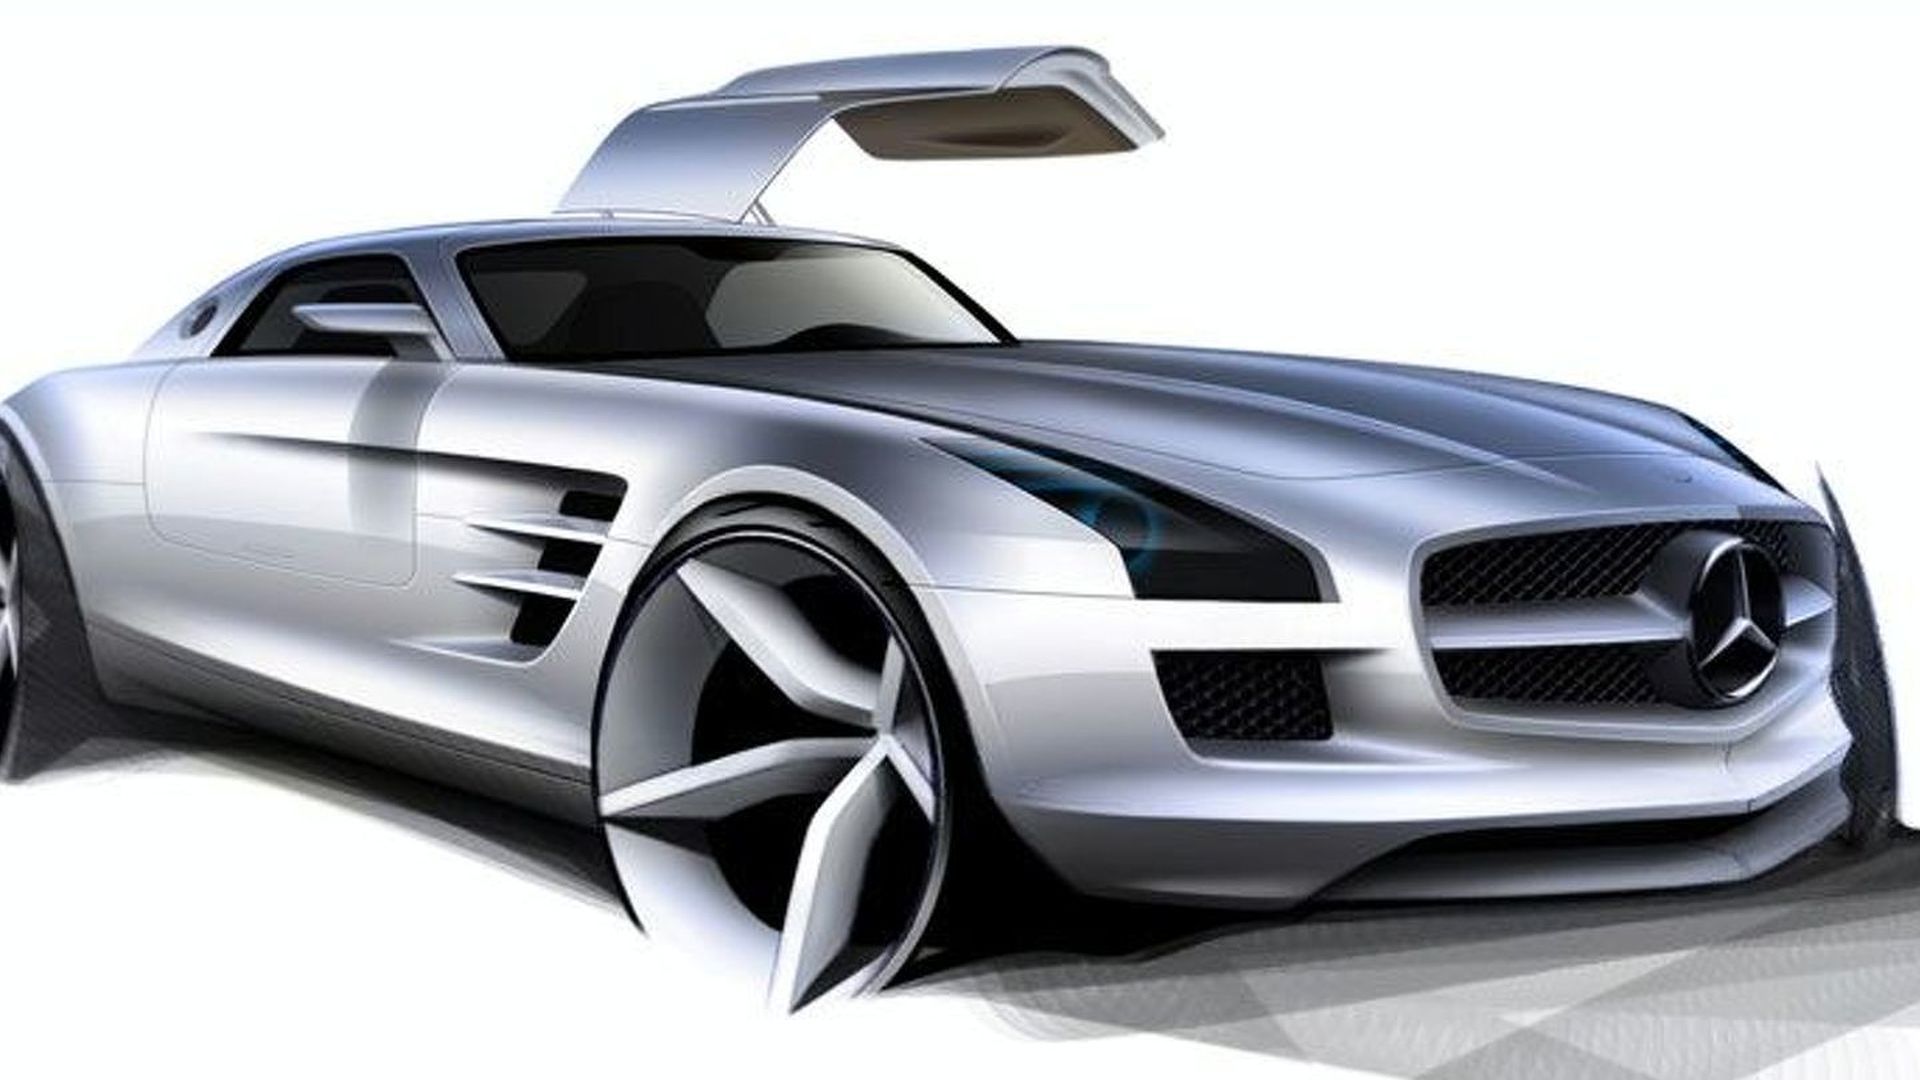 Mercedes SLS AMG Gullwing electric vehicle planned for 2015